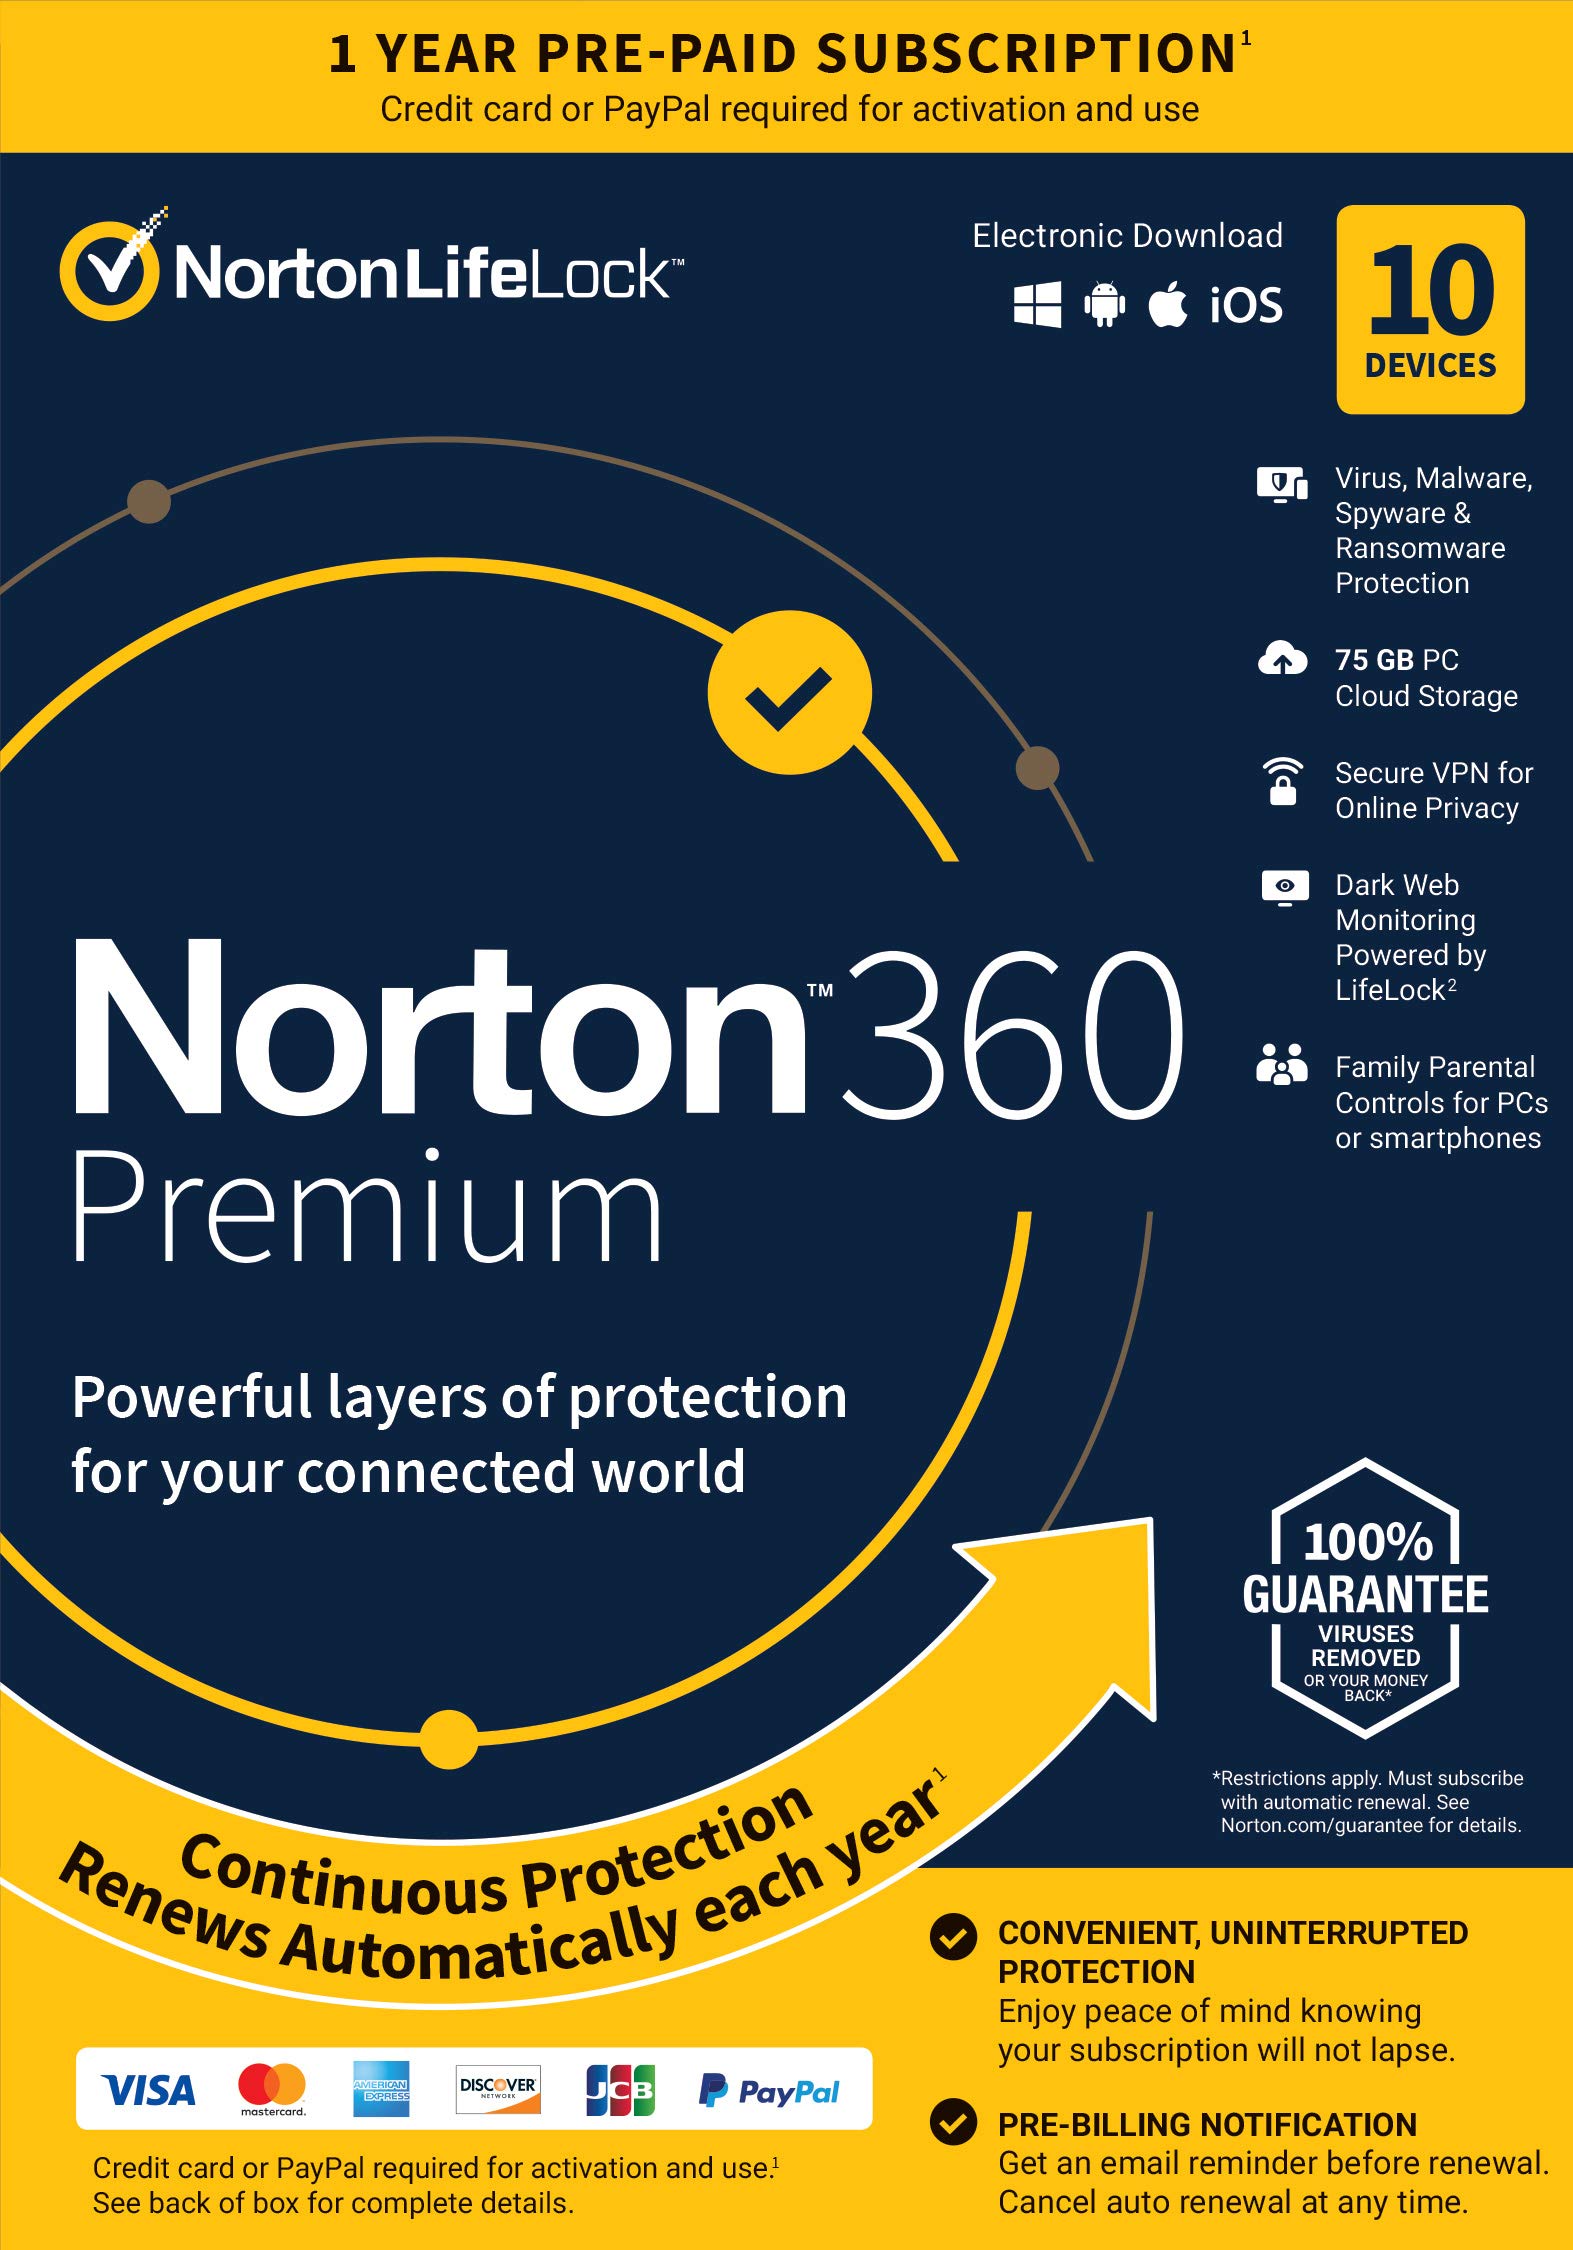 Norton 360 Premium (2022 Ready) Antivirus software for 10 Devices with Auto Renewal - $19.99